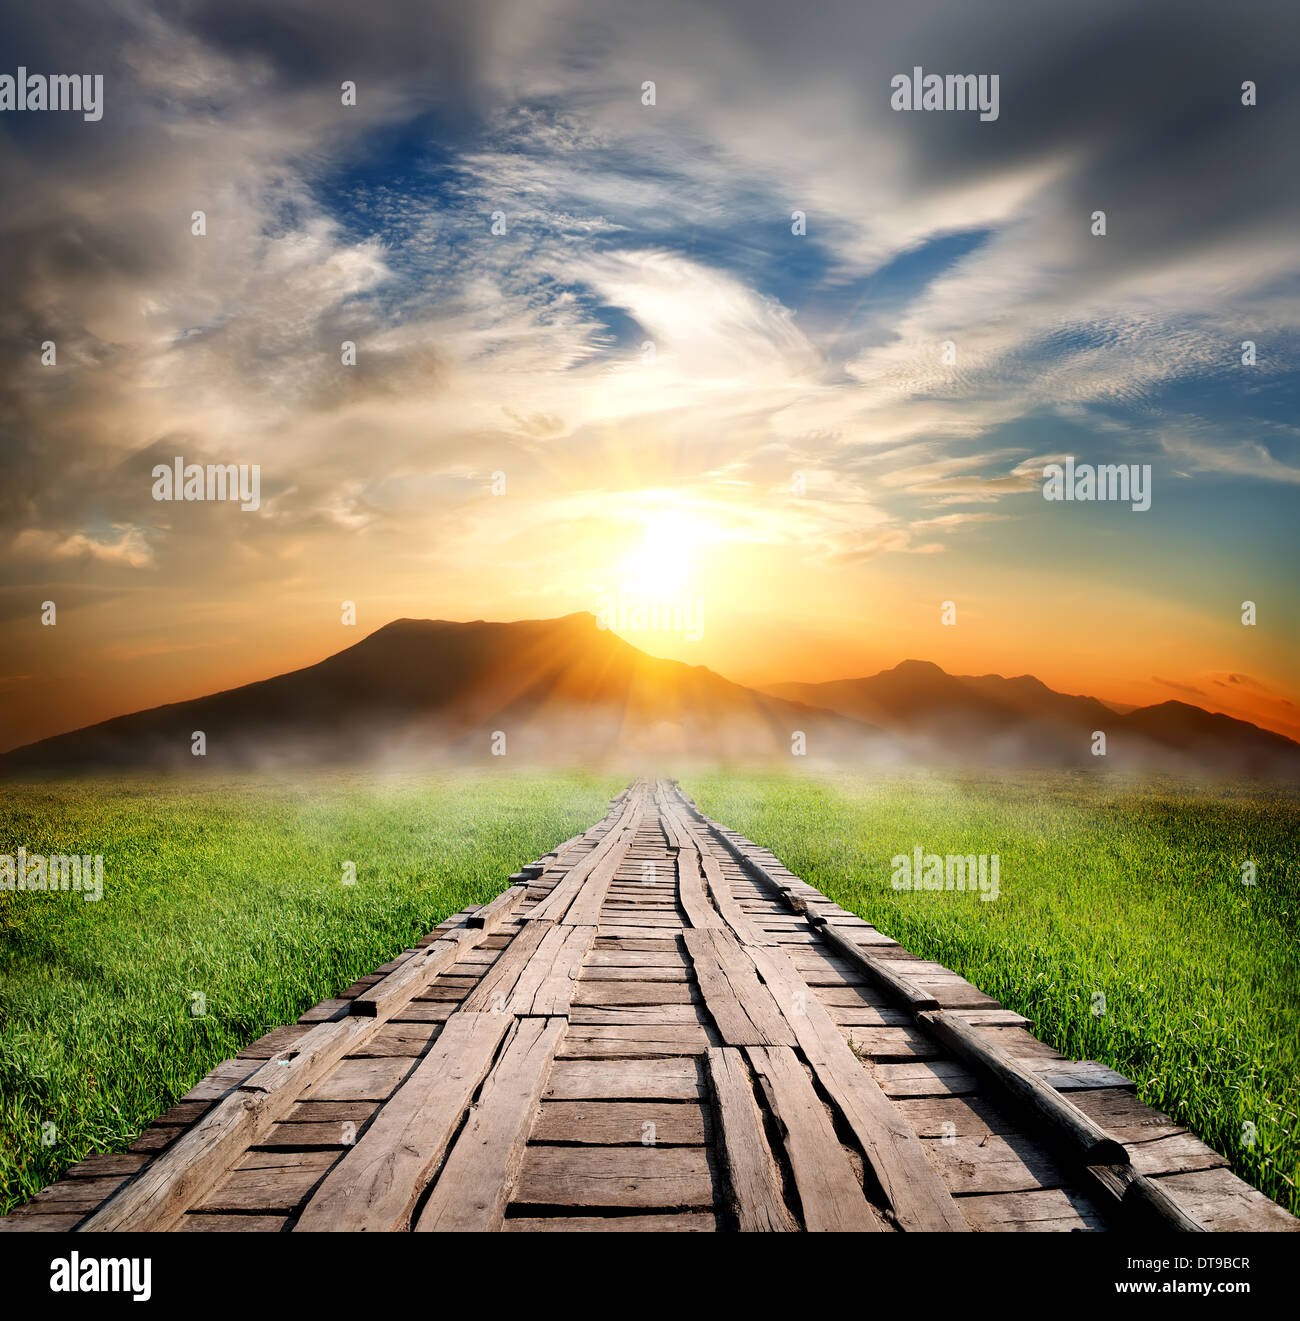 Wooden road in the mountains at sunset Stock Photo